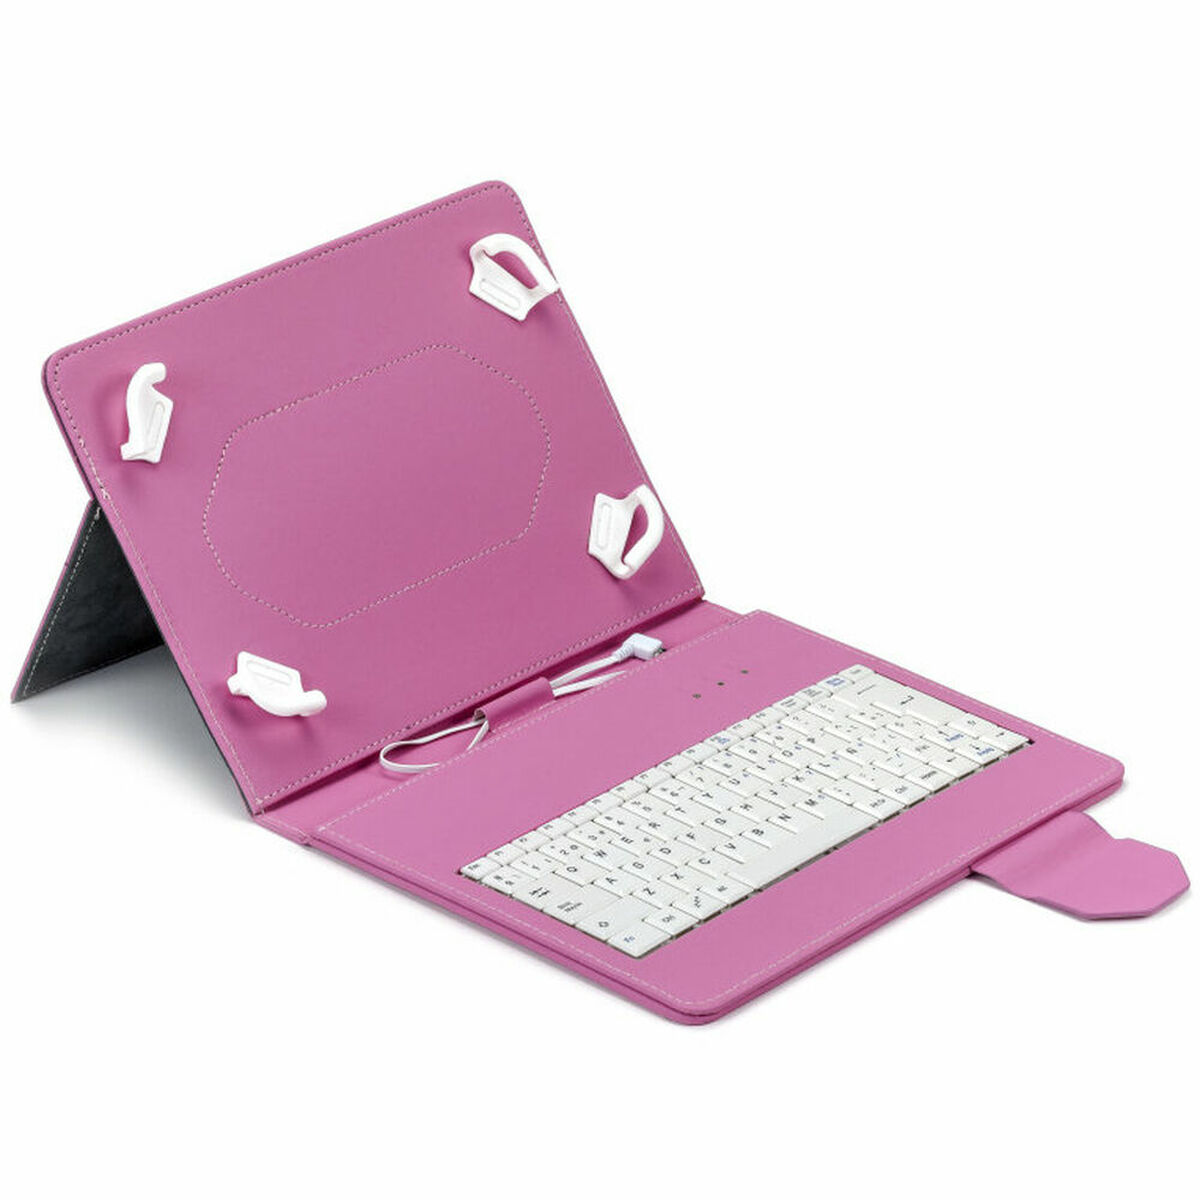 Bluetooth Keyboard with Support for Tablet Maillon Technologique MTKEYUSBPINK 9,7" - 10,2" Pink